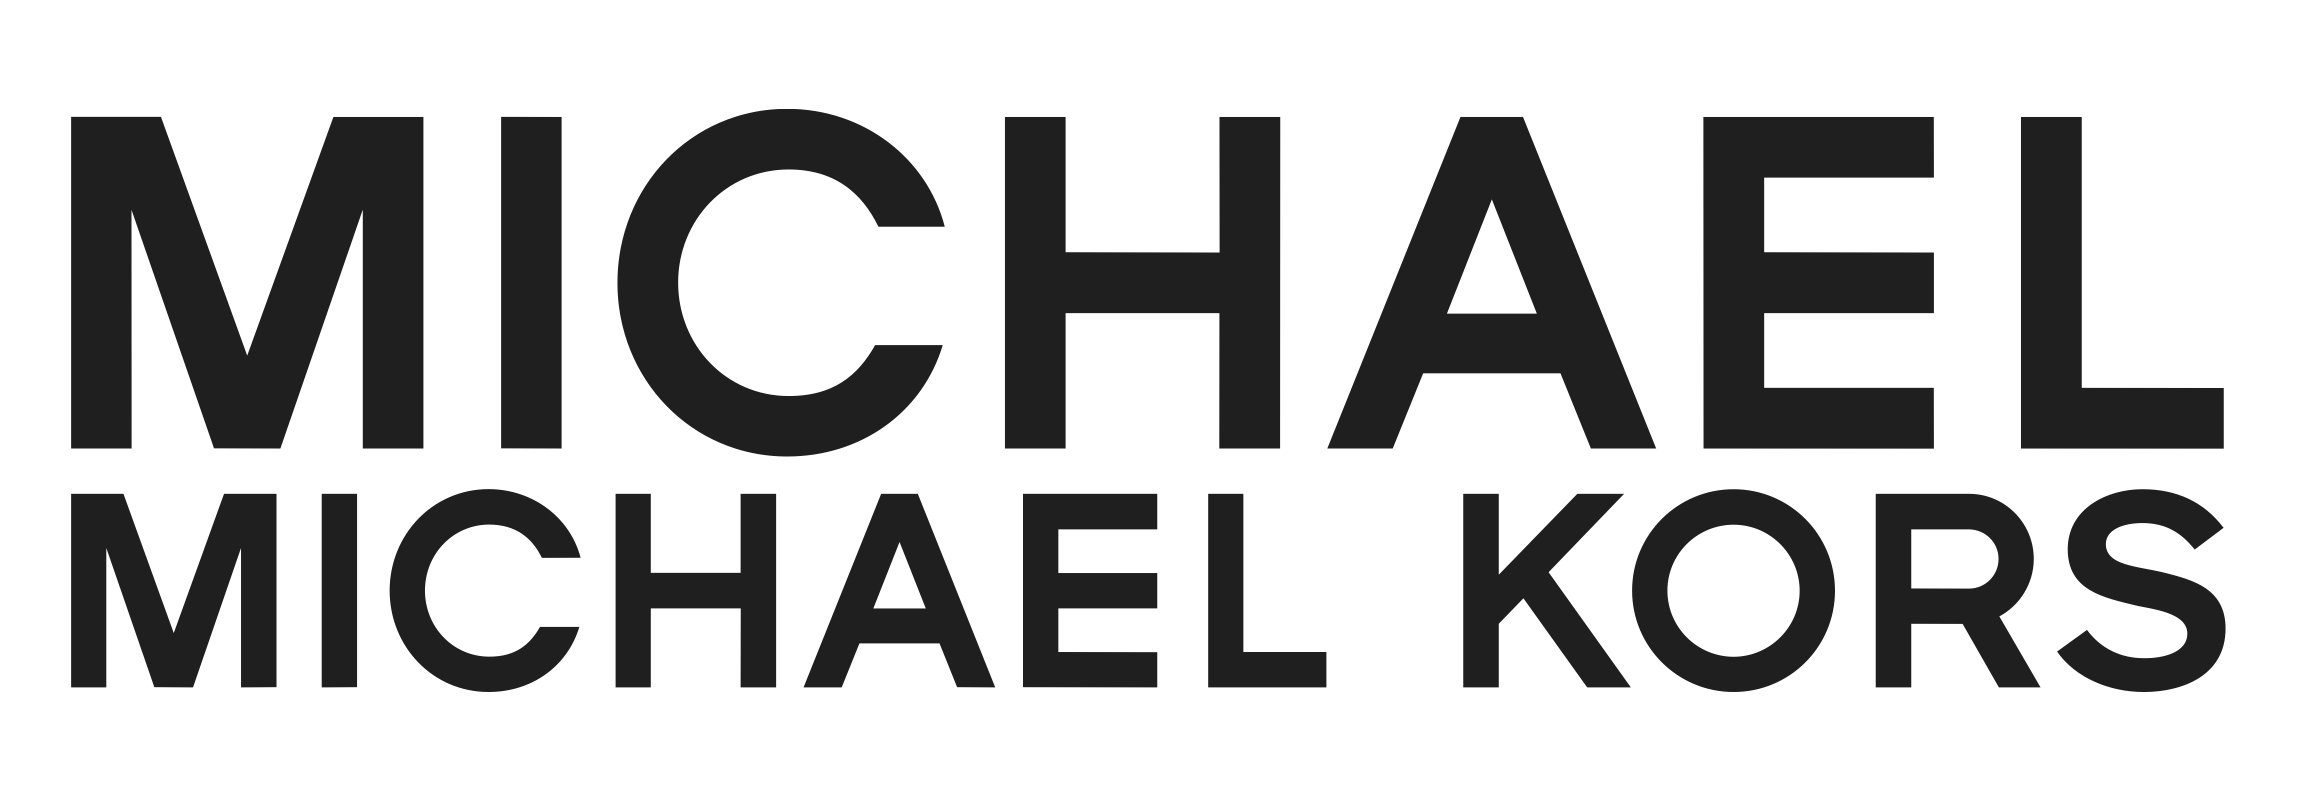 Michael Kors logo and symbol, meaning 